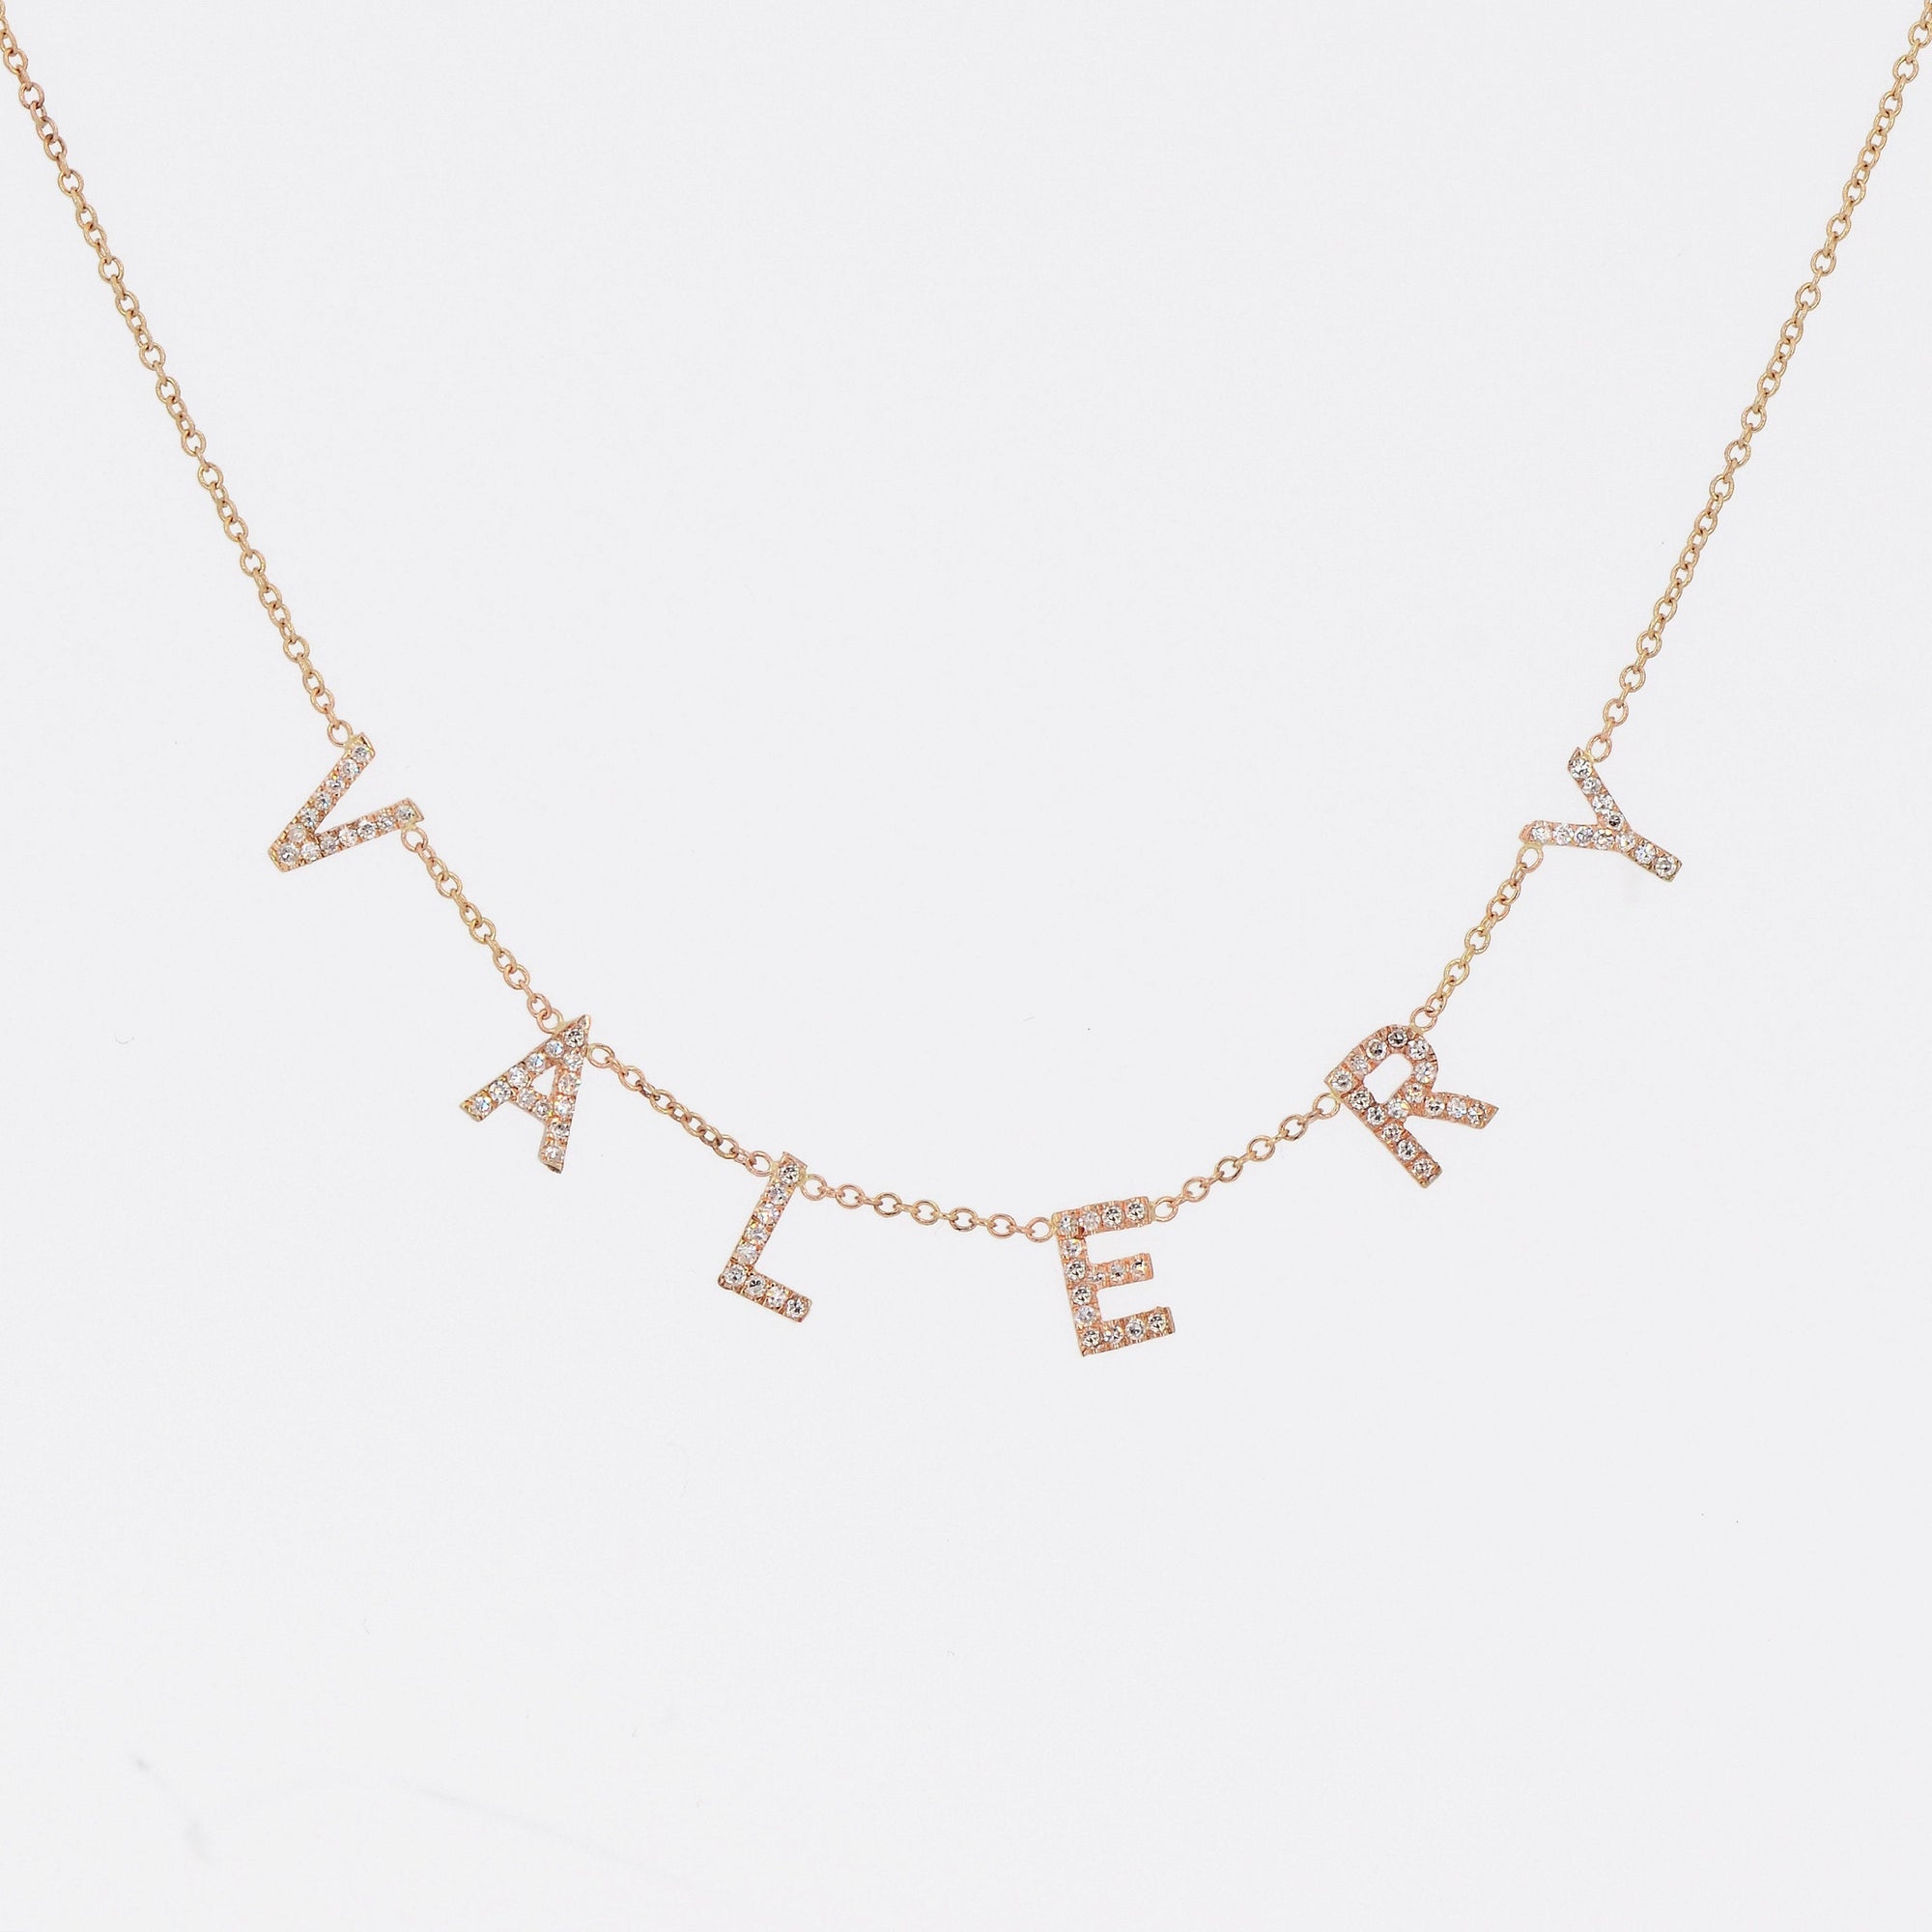 Custom Name Necklace, Diamond Initial Necklace, 14k Gold Letter Necklace